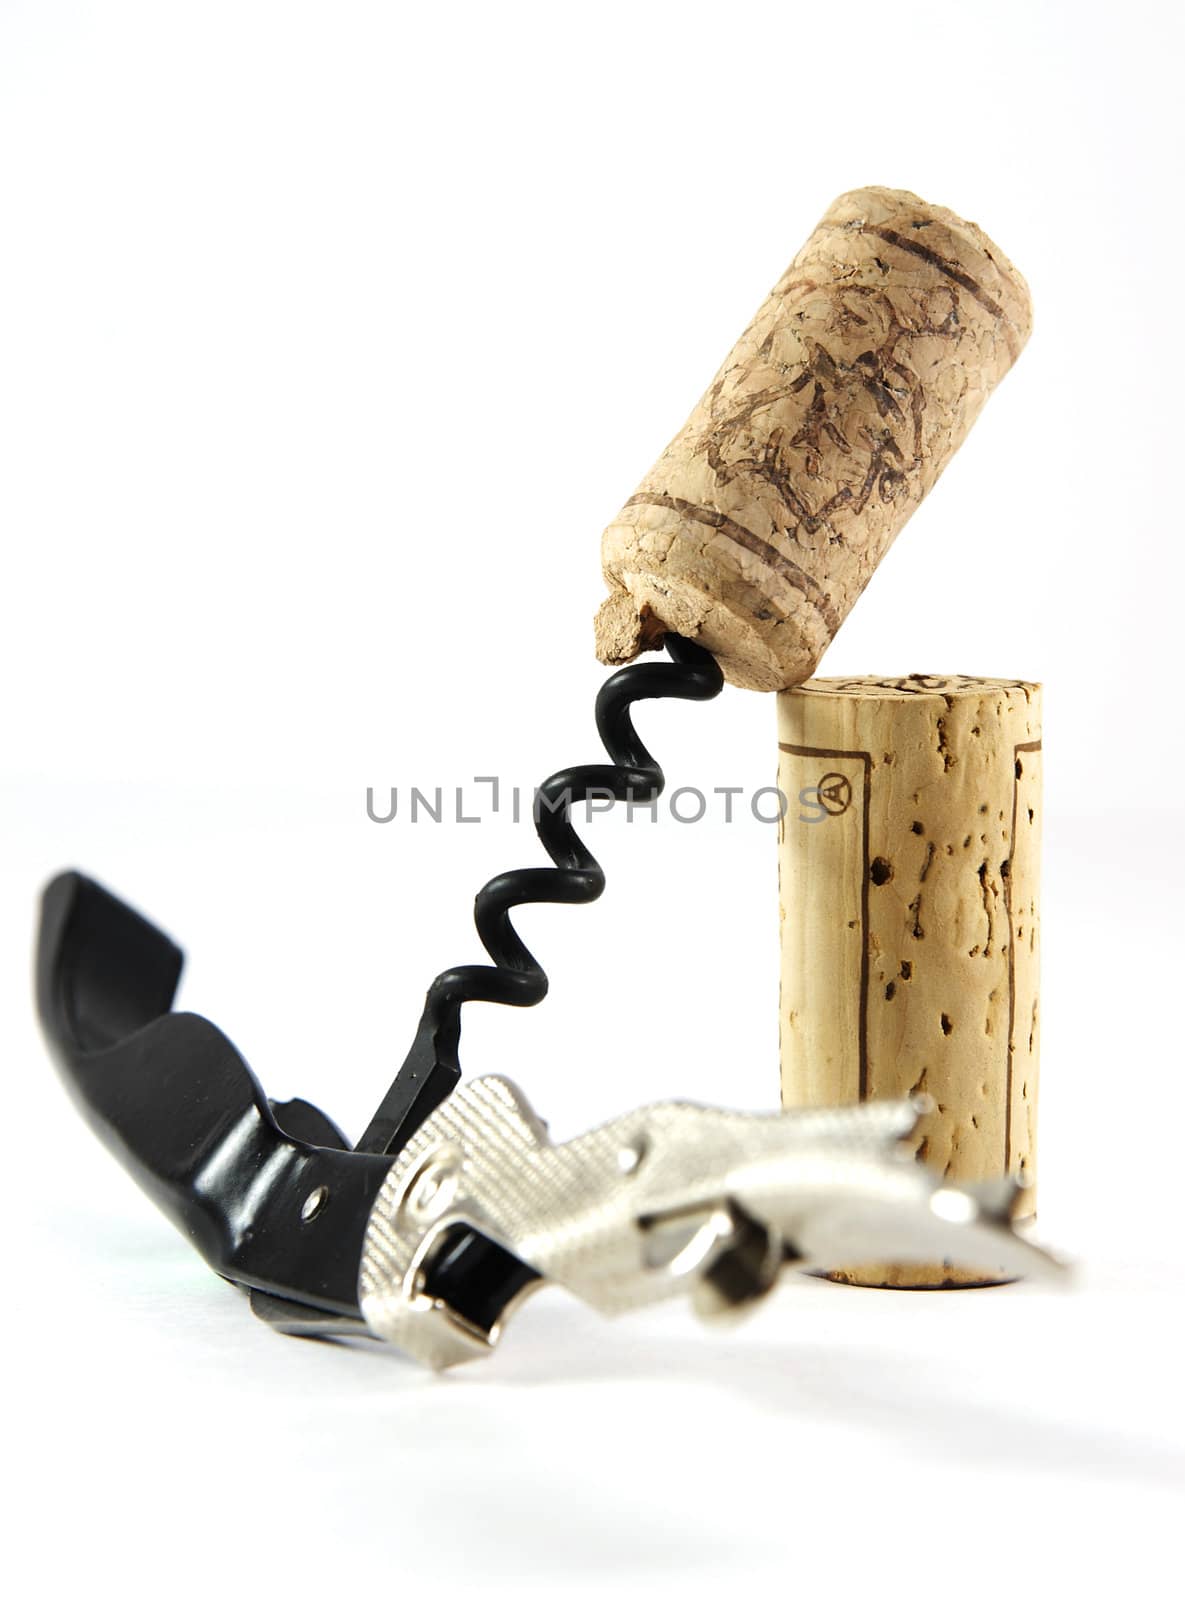 Corkscrew and two corks isolated over white background